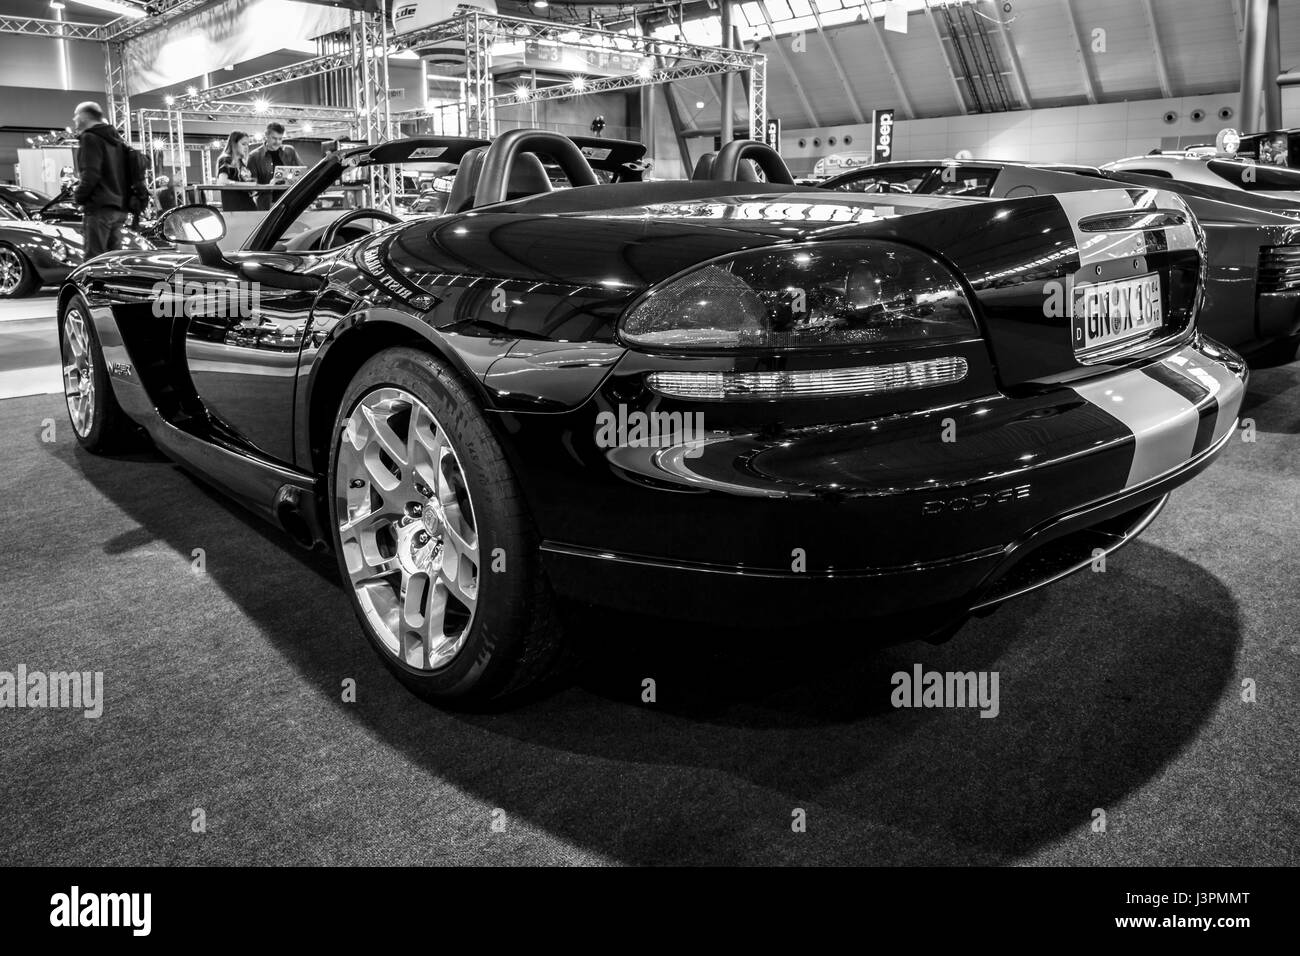 STUTTGART, GERMANY - MARCH 03, 2017: Sports car Dodge Viper SRT-10, 2008. Rear view. Black and white.  Europe's greatest classic car exhibition 'RETRO CLASSICS' Stock Photo